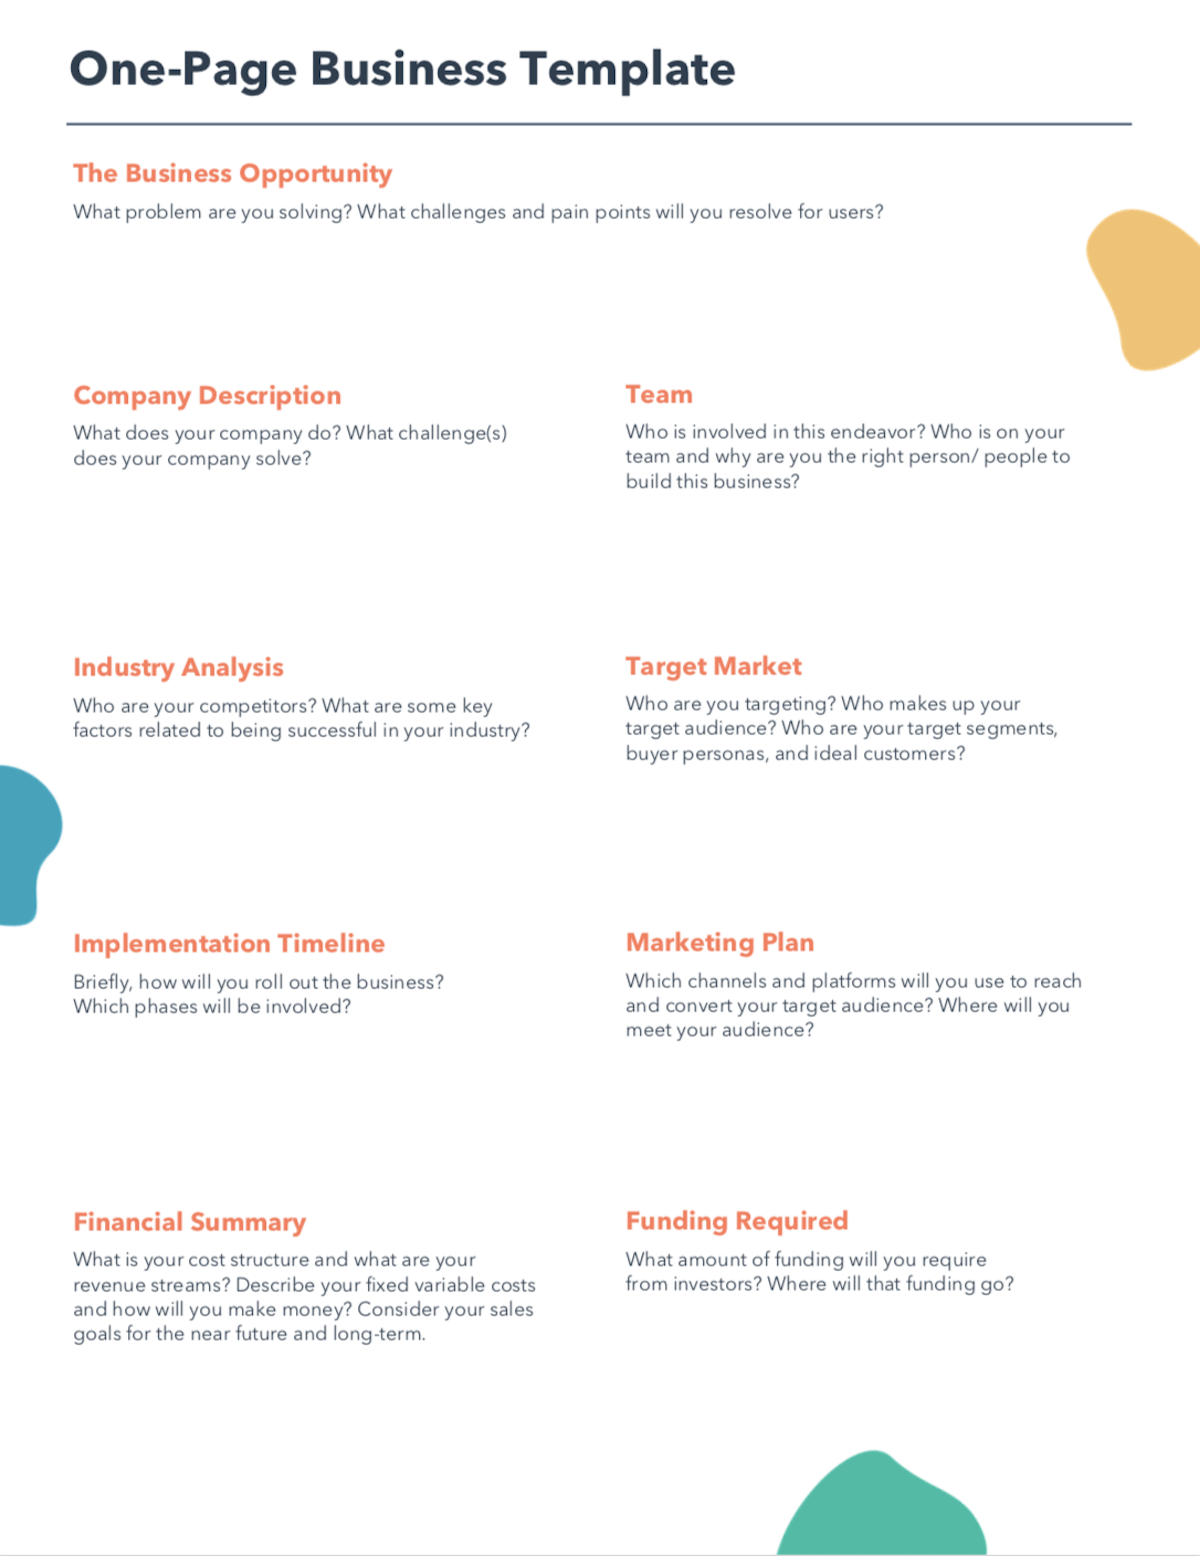 Free One Page Business Plan Template for PDF  Word  HubSpot Throughout Investment Proposal Template